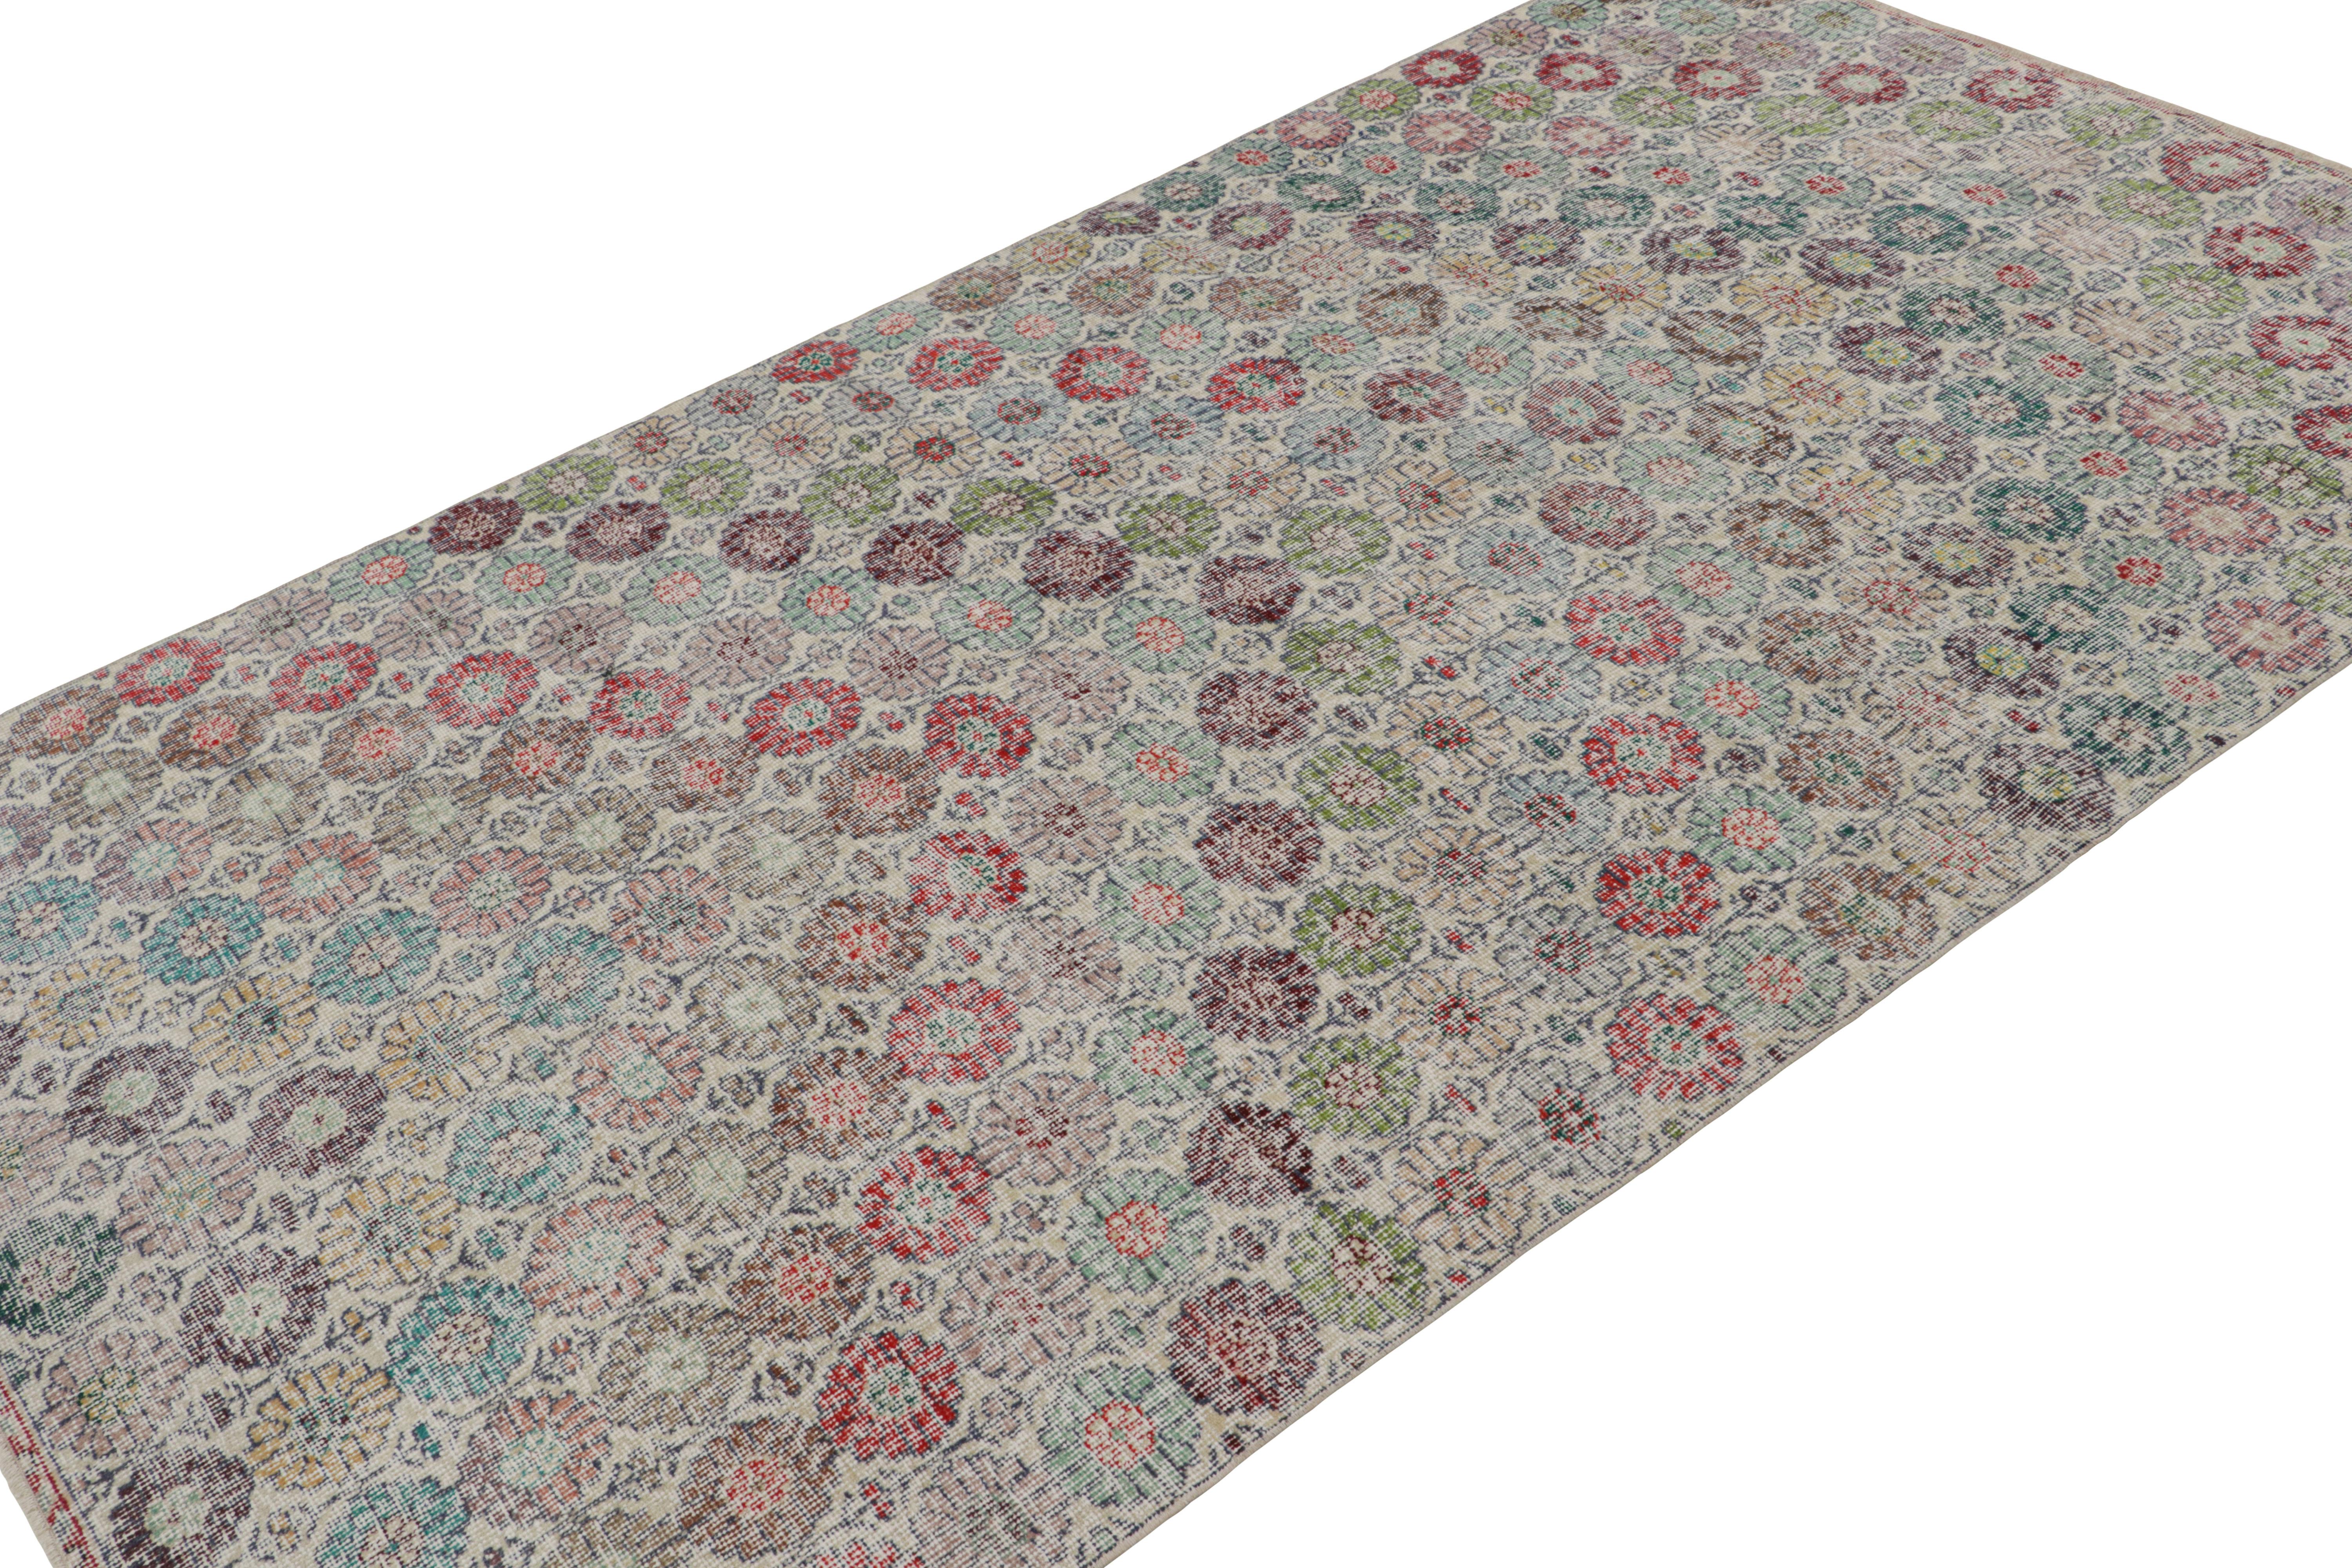 Handknotted in wool, this 5x8 vintage rug originates from Turkey, circa 1960-1970 and is believed to hail from the Turkish artist Zeki Muren. 

On the Design:

The rug features a beige field with cream undertones underscoring vibrant floral patterns